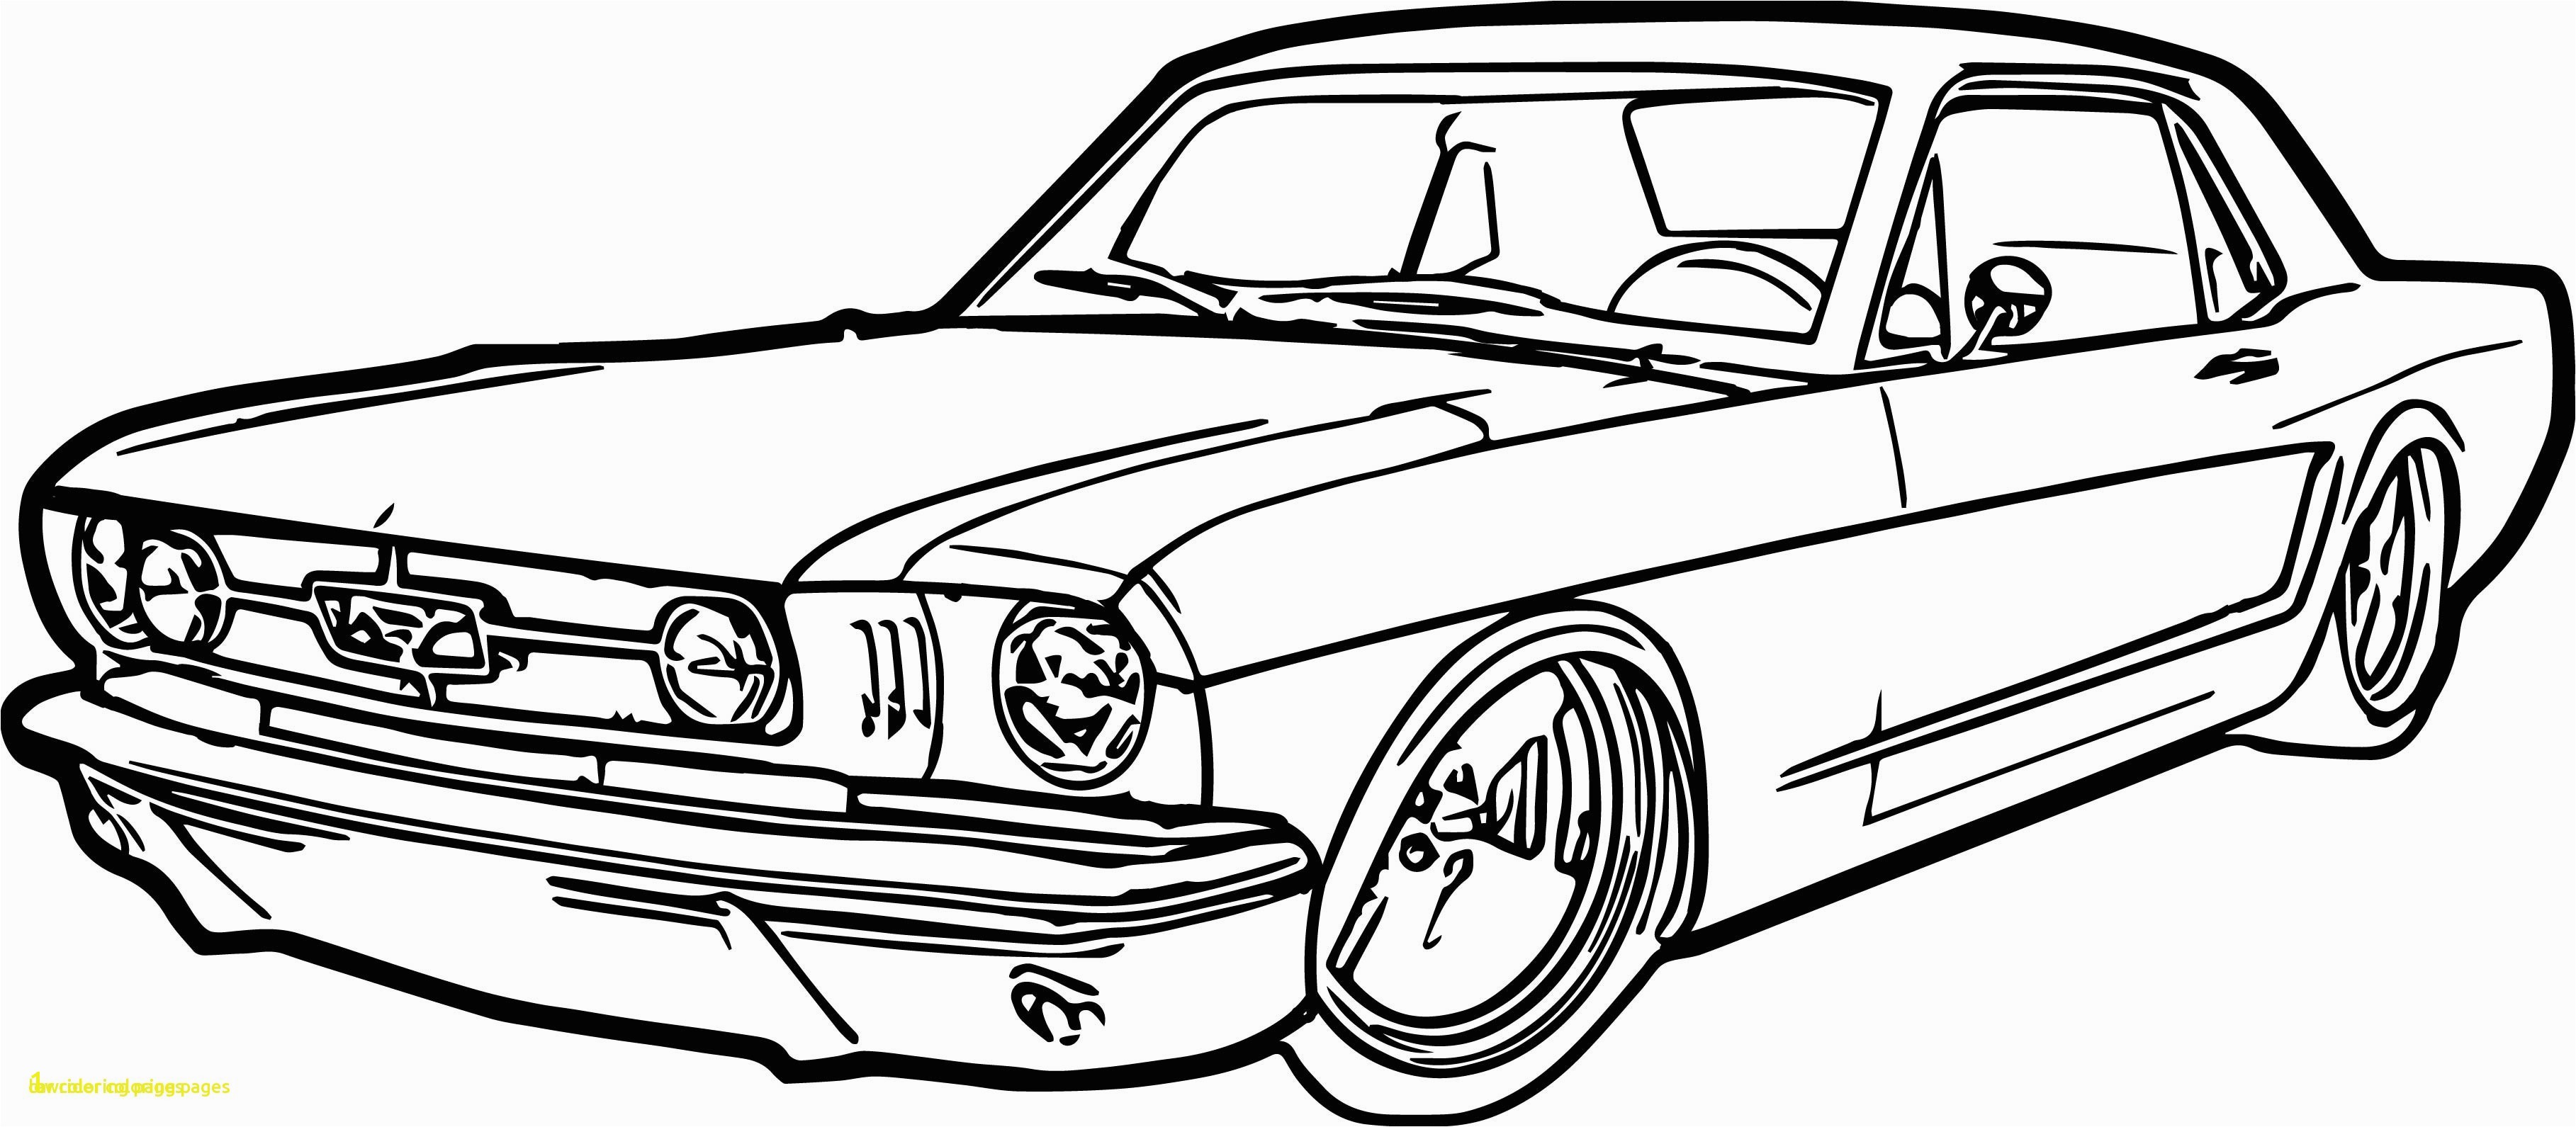 Lowrider Coloring Pages